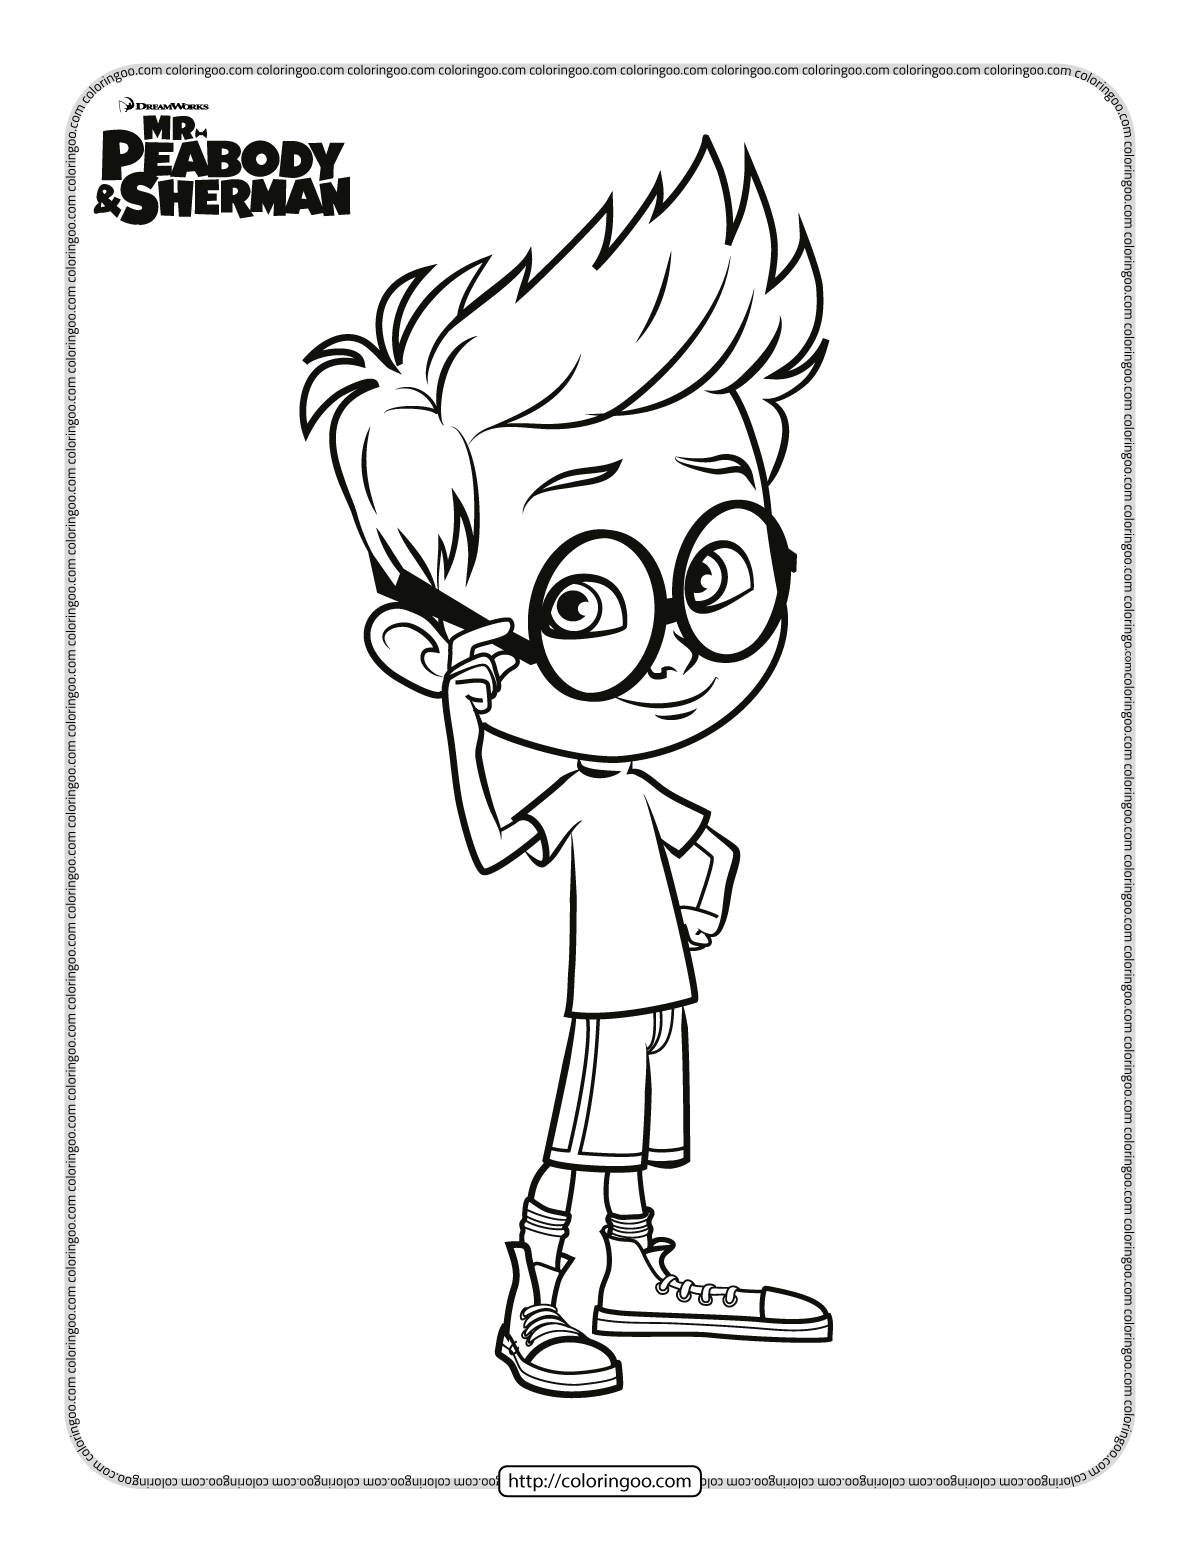 mr peabody and sherman coloring pages